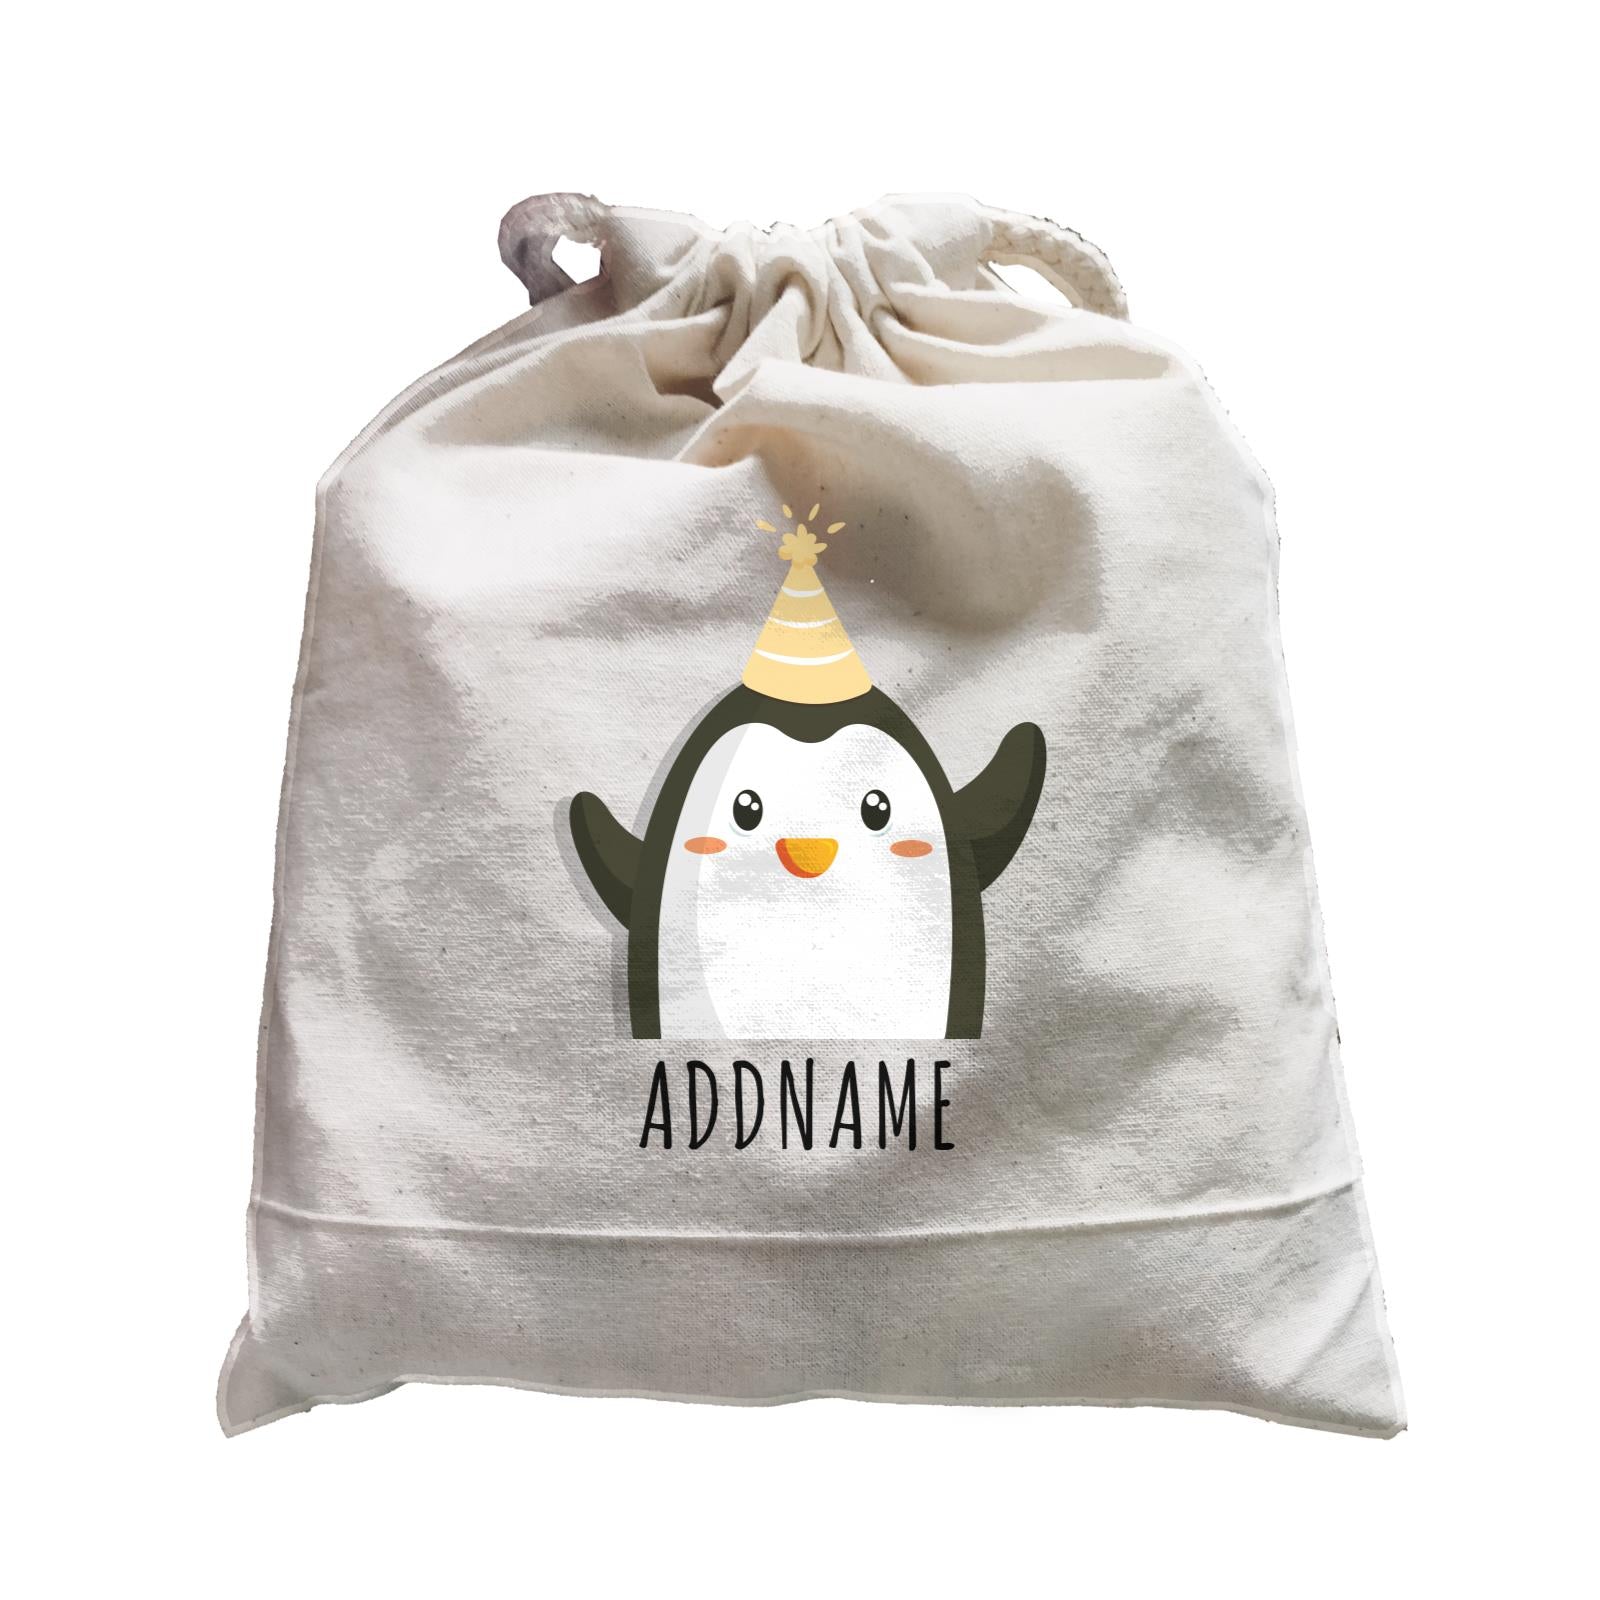 Birthday Cute Penguin Wearing Party Hat Addname Satchel